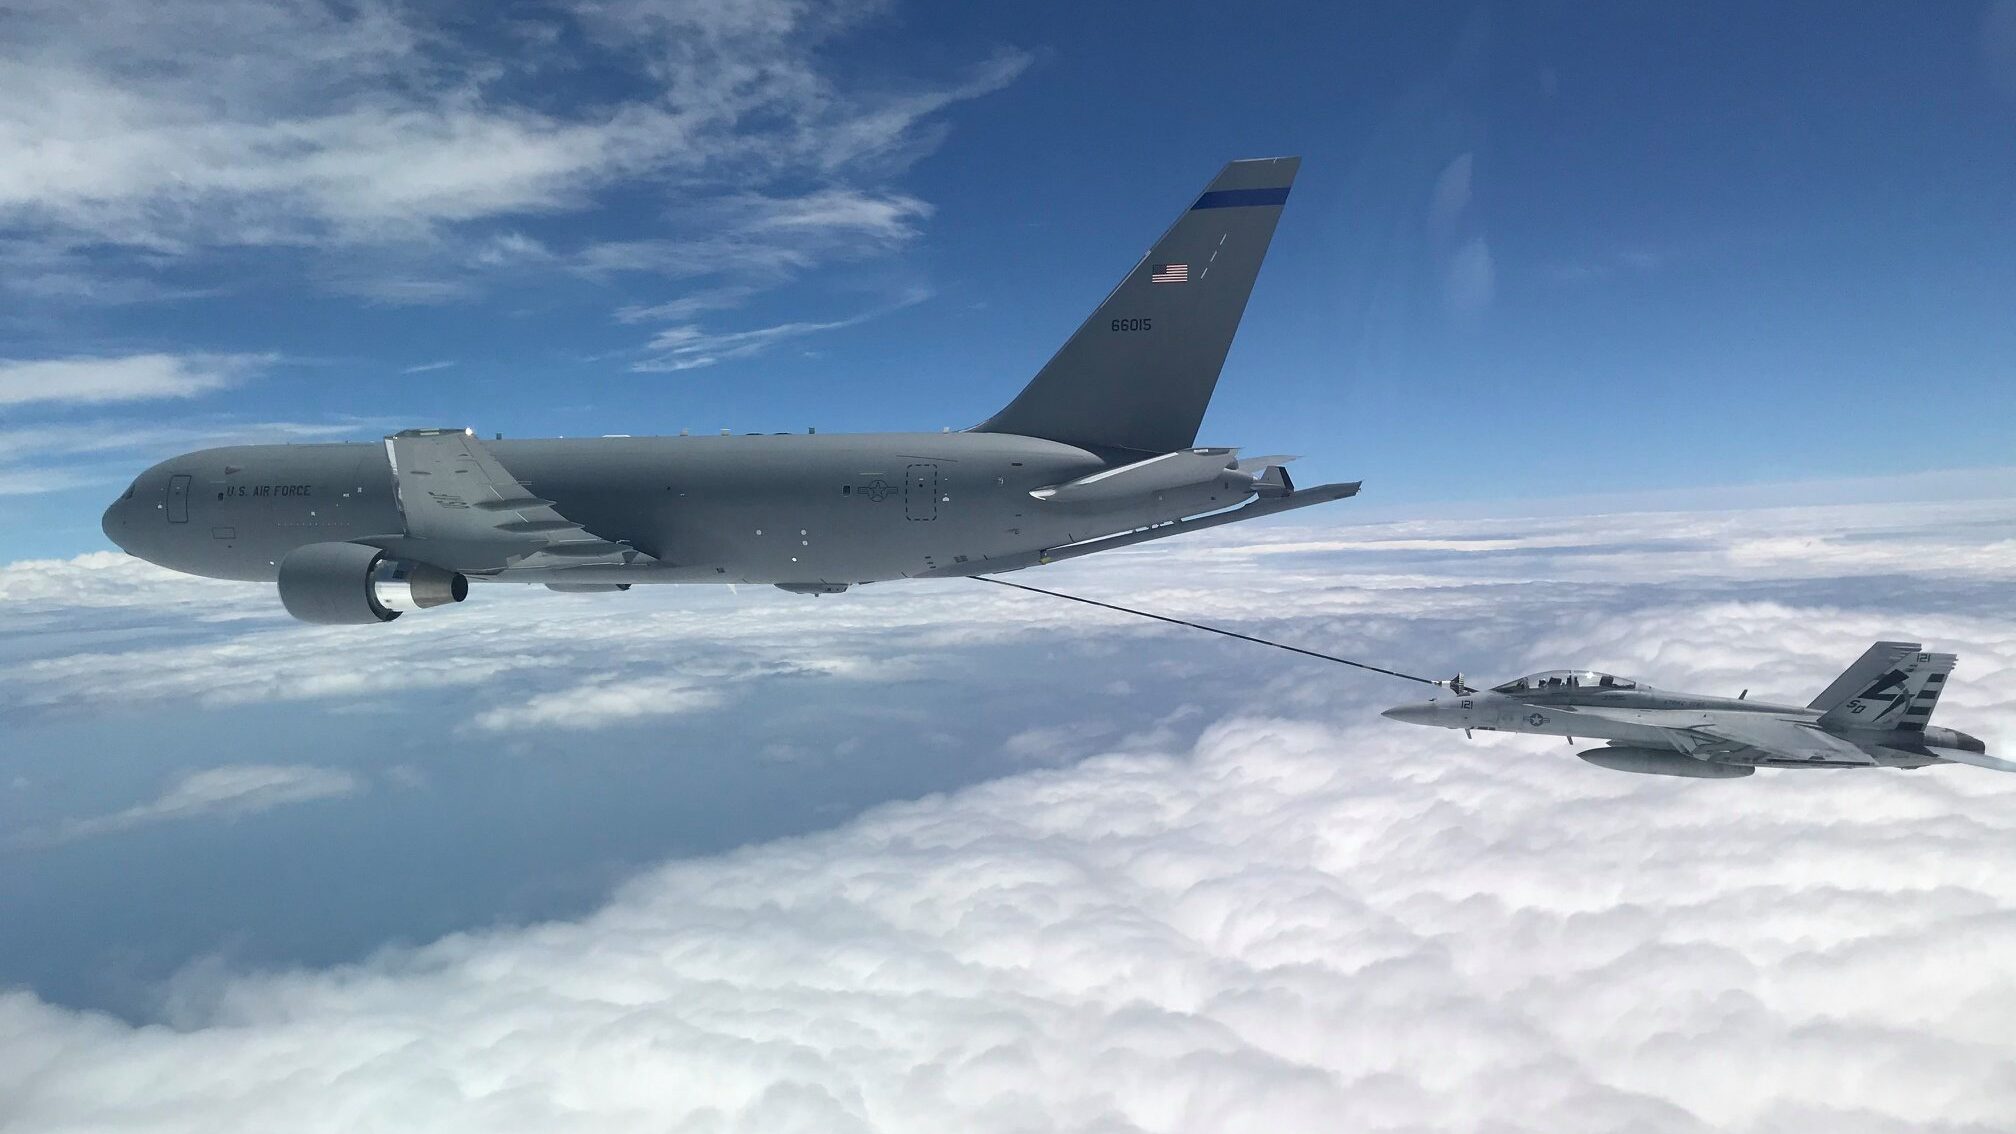 KC-46: Baby Steps To Wider Availability For Operators